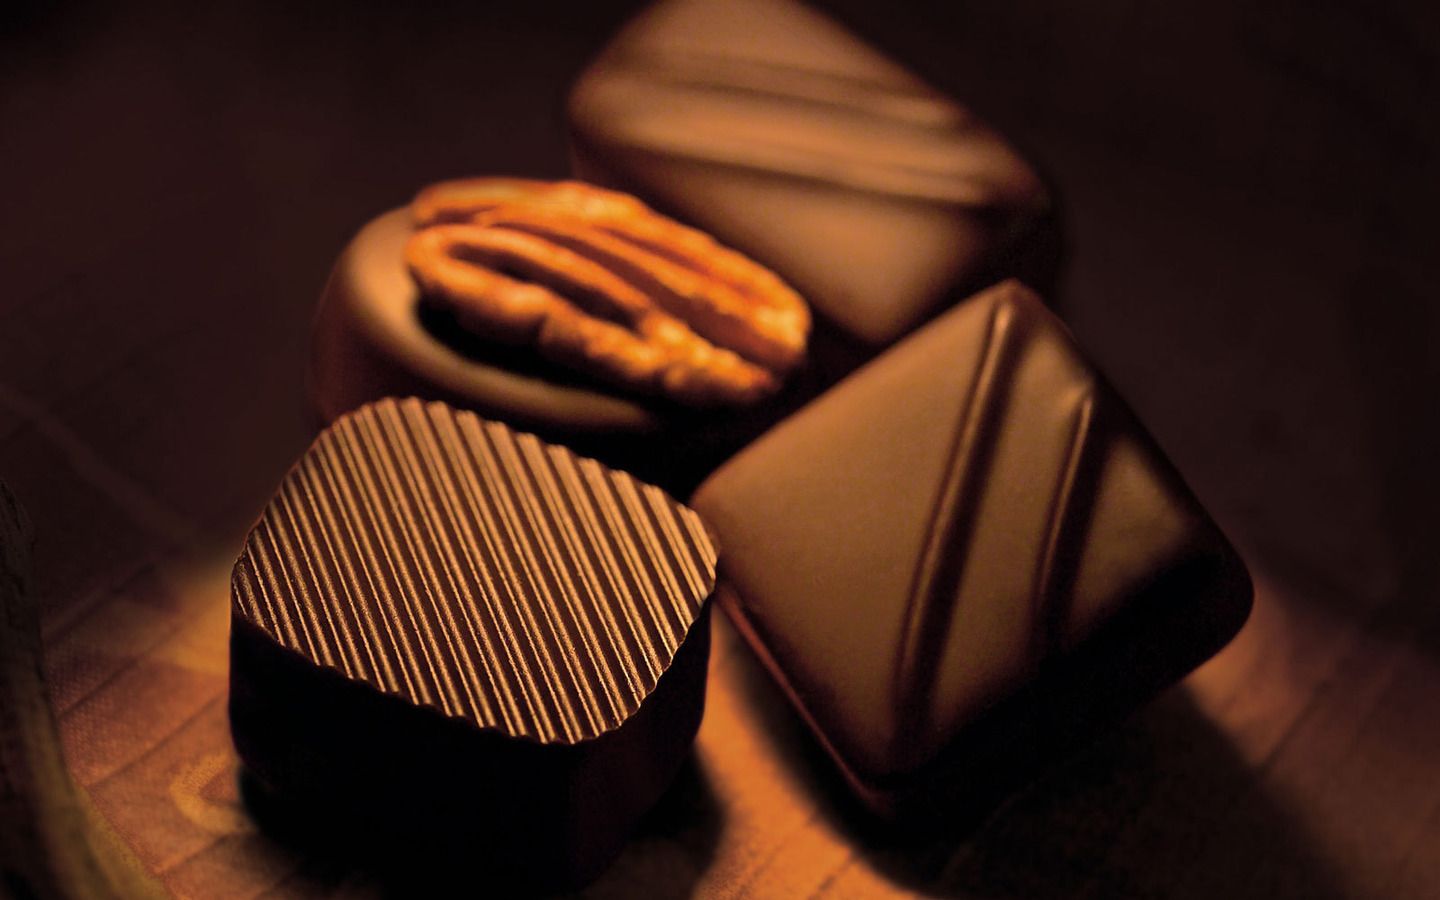 Chocolates on a wooden table - Chocolate